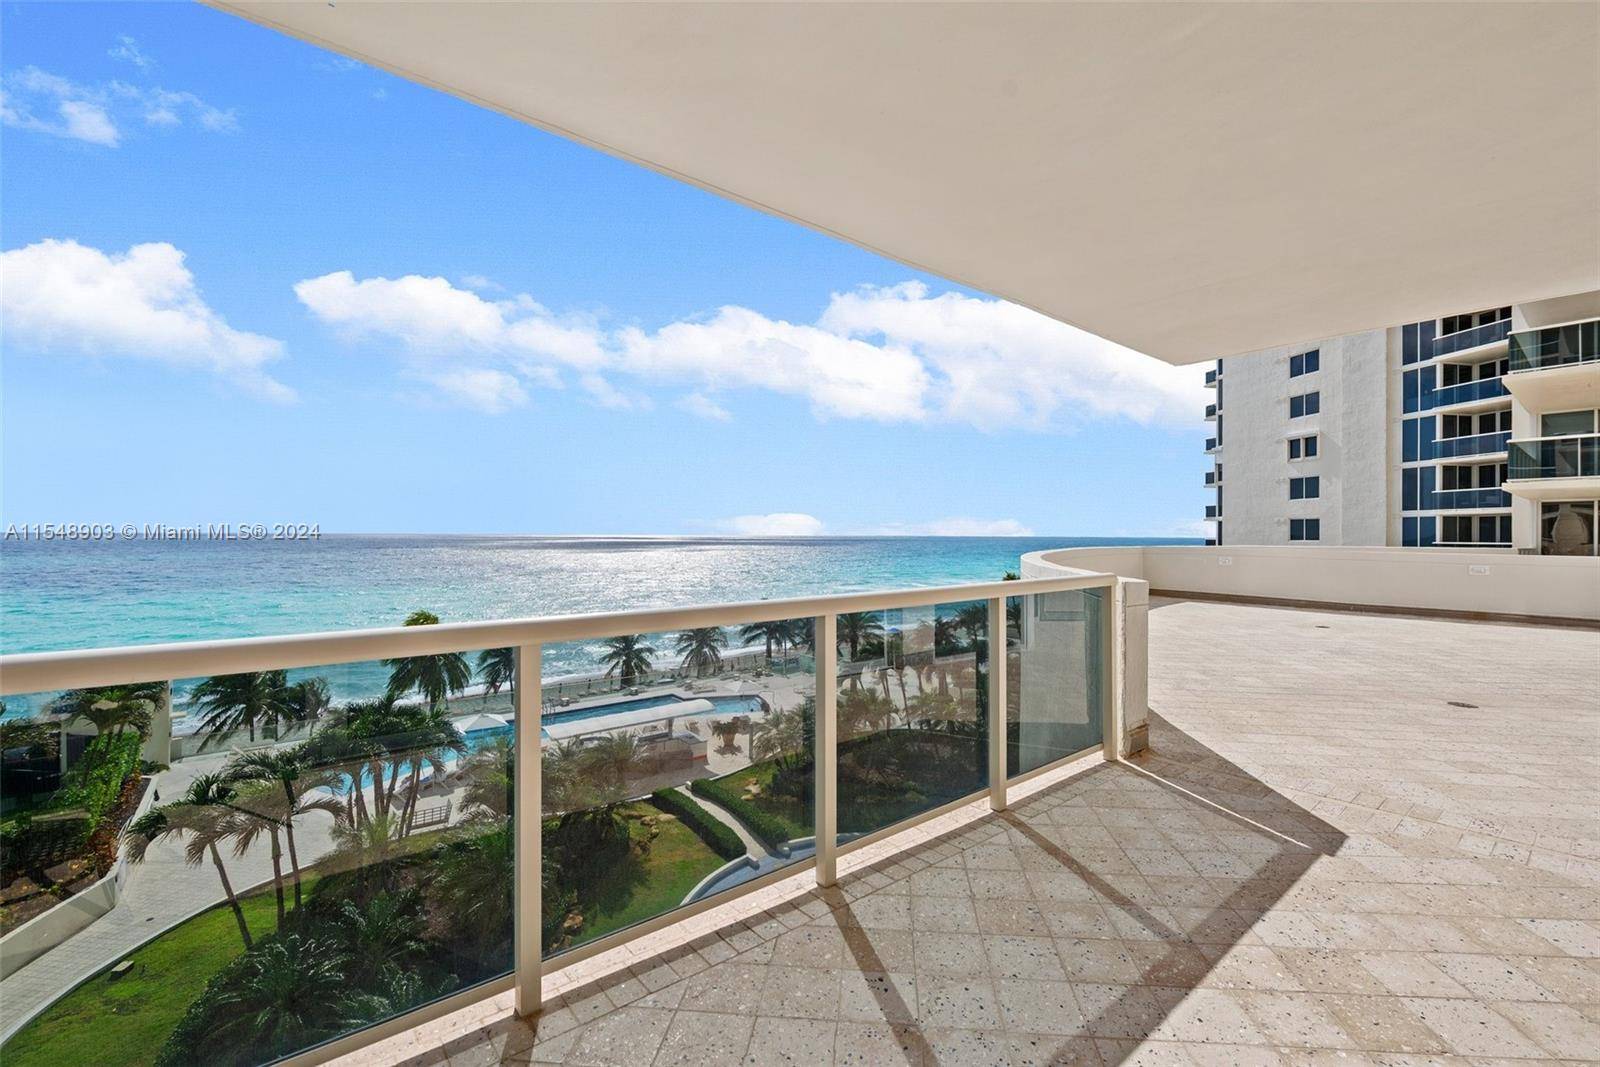 DESIRABLE 04 LINE LANAI IN THE OCEAN TWO CONDO IN SUNNY ISLES.